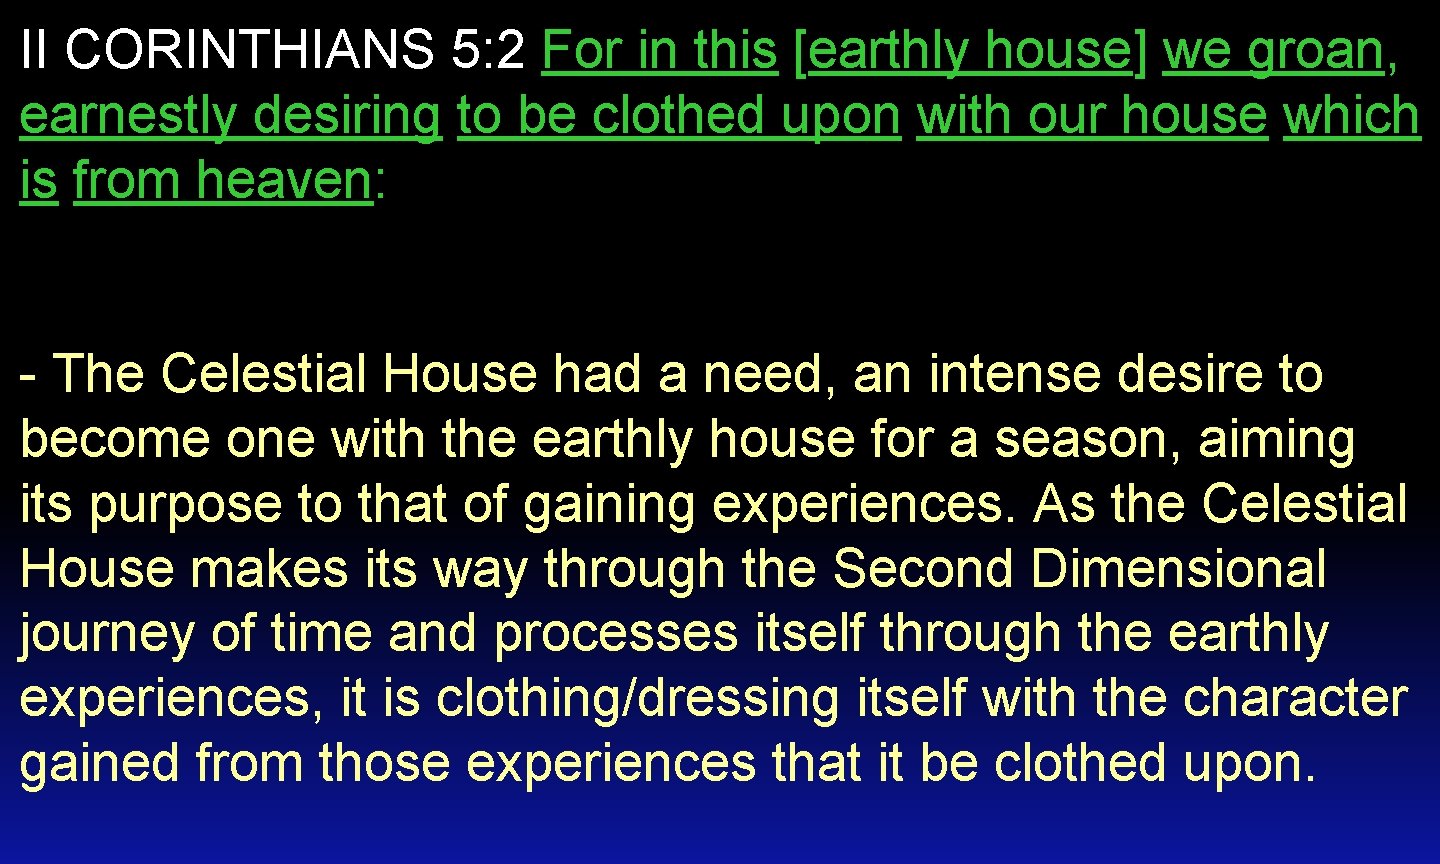 II CORINTHIANS 5: 2 For in this [earthly house] we groan, earnestly desiring to